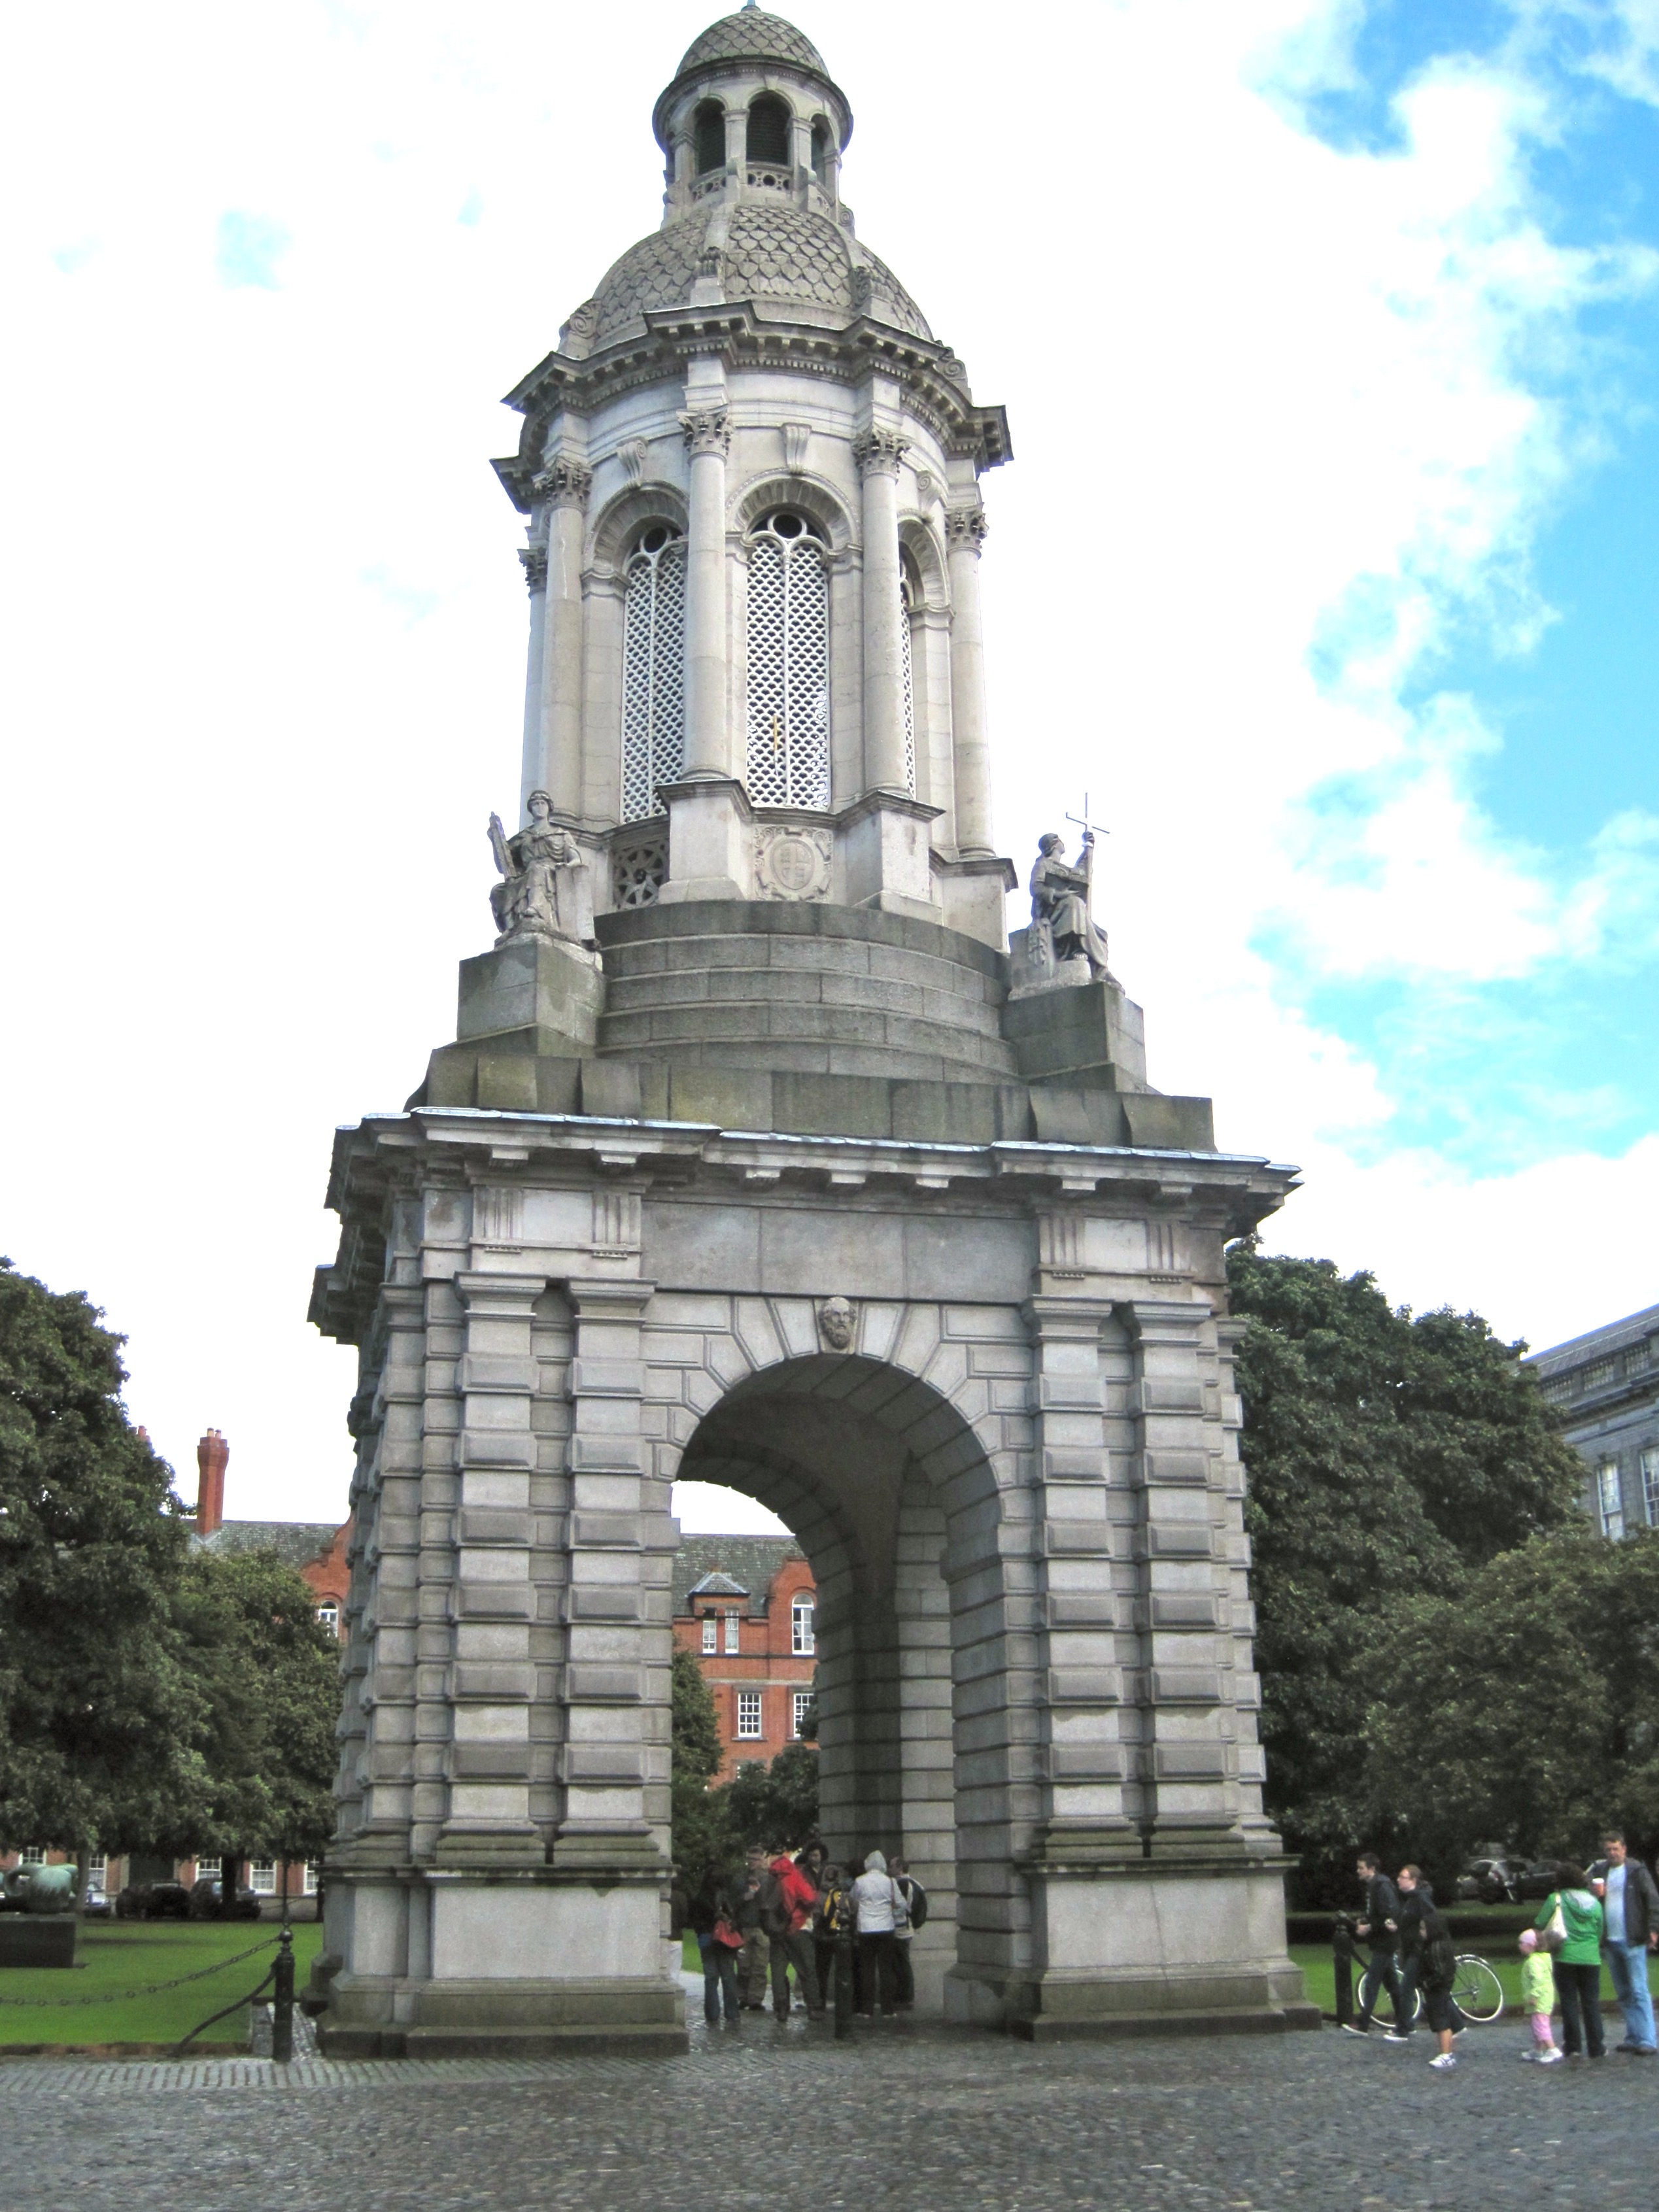 The Campanille, or bell tower, is an enduring symbol of Trinity College. Photo by Marla Norman